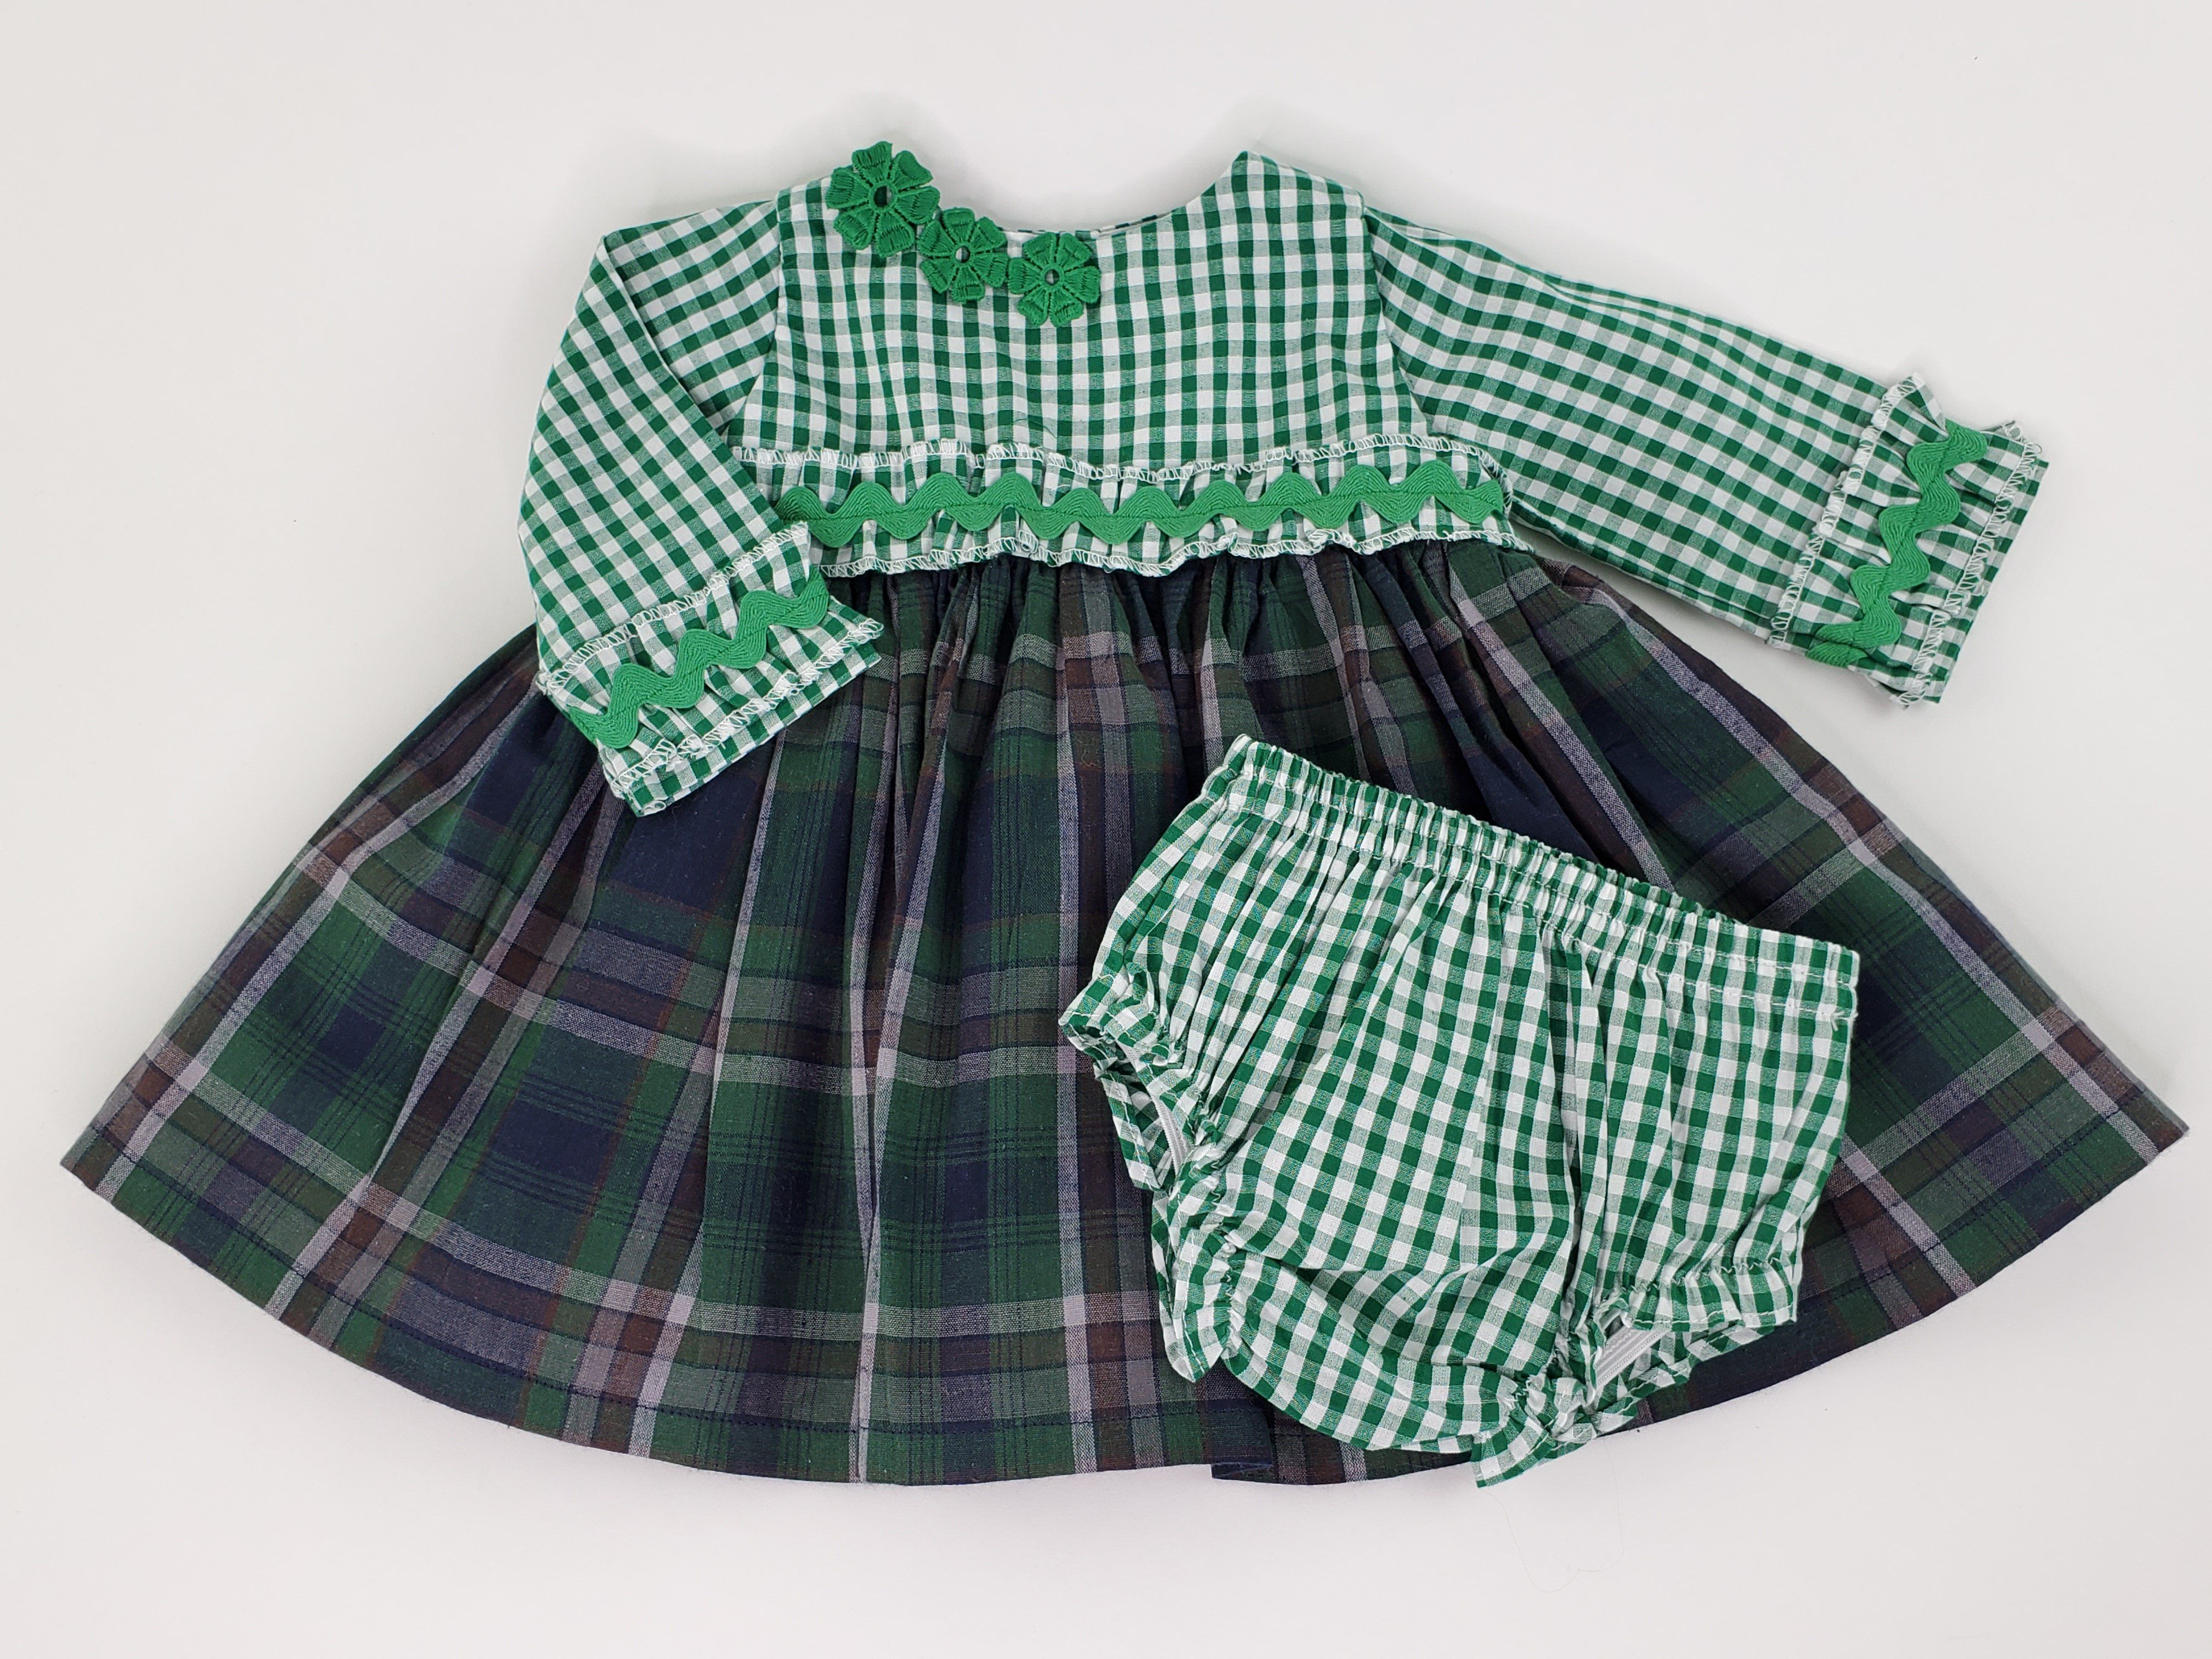 Empire Waist Long Sleeve Check and Plaid Girl's Dress & Bloomers Set-Children's Clothing Store Dress & Bloomers Set Alfa Baby Boutique 0-3 Green Female